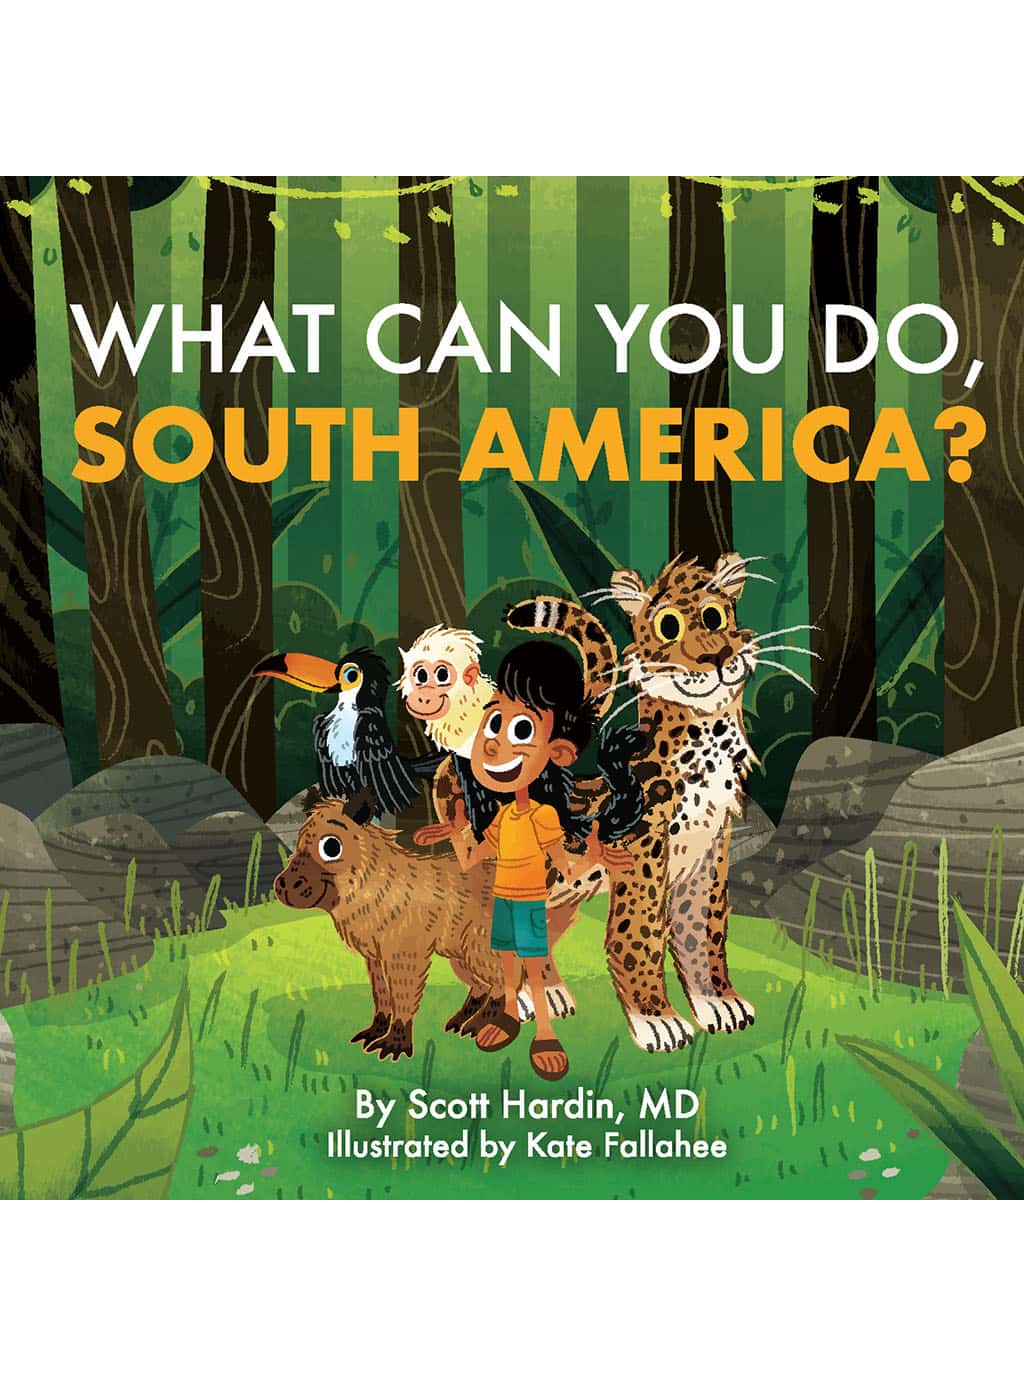 What Can You Do, South America? Christian board books for toddlers cover